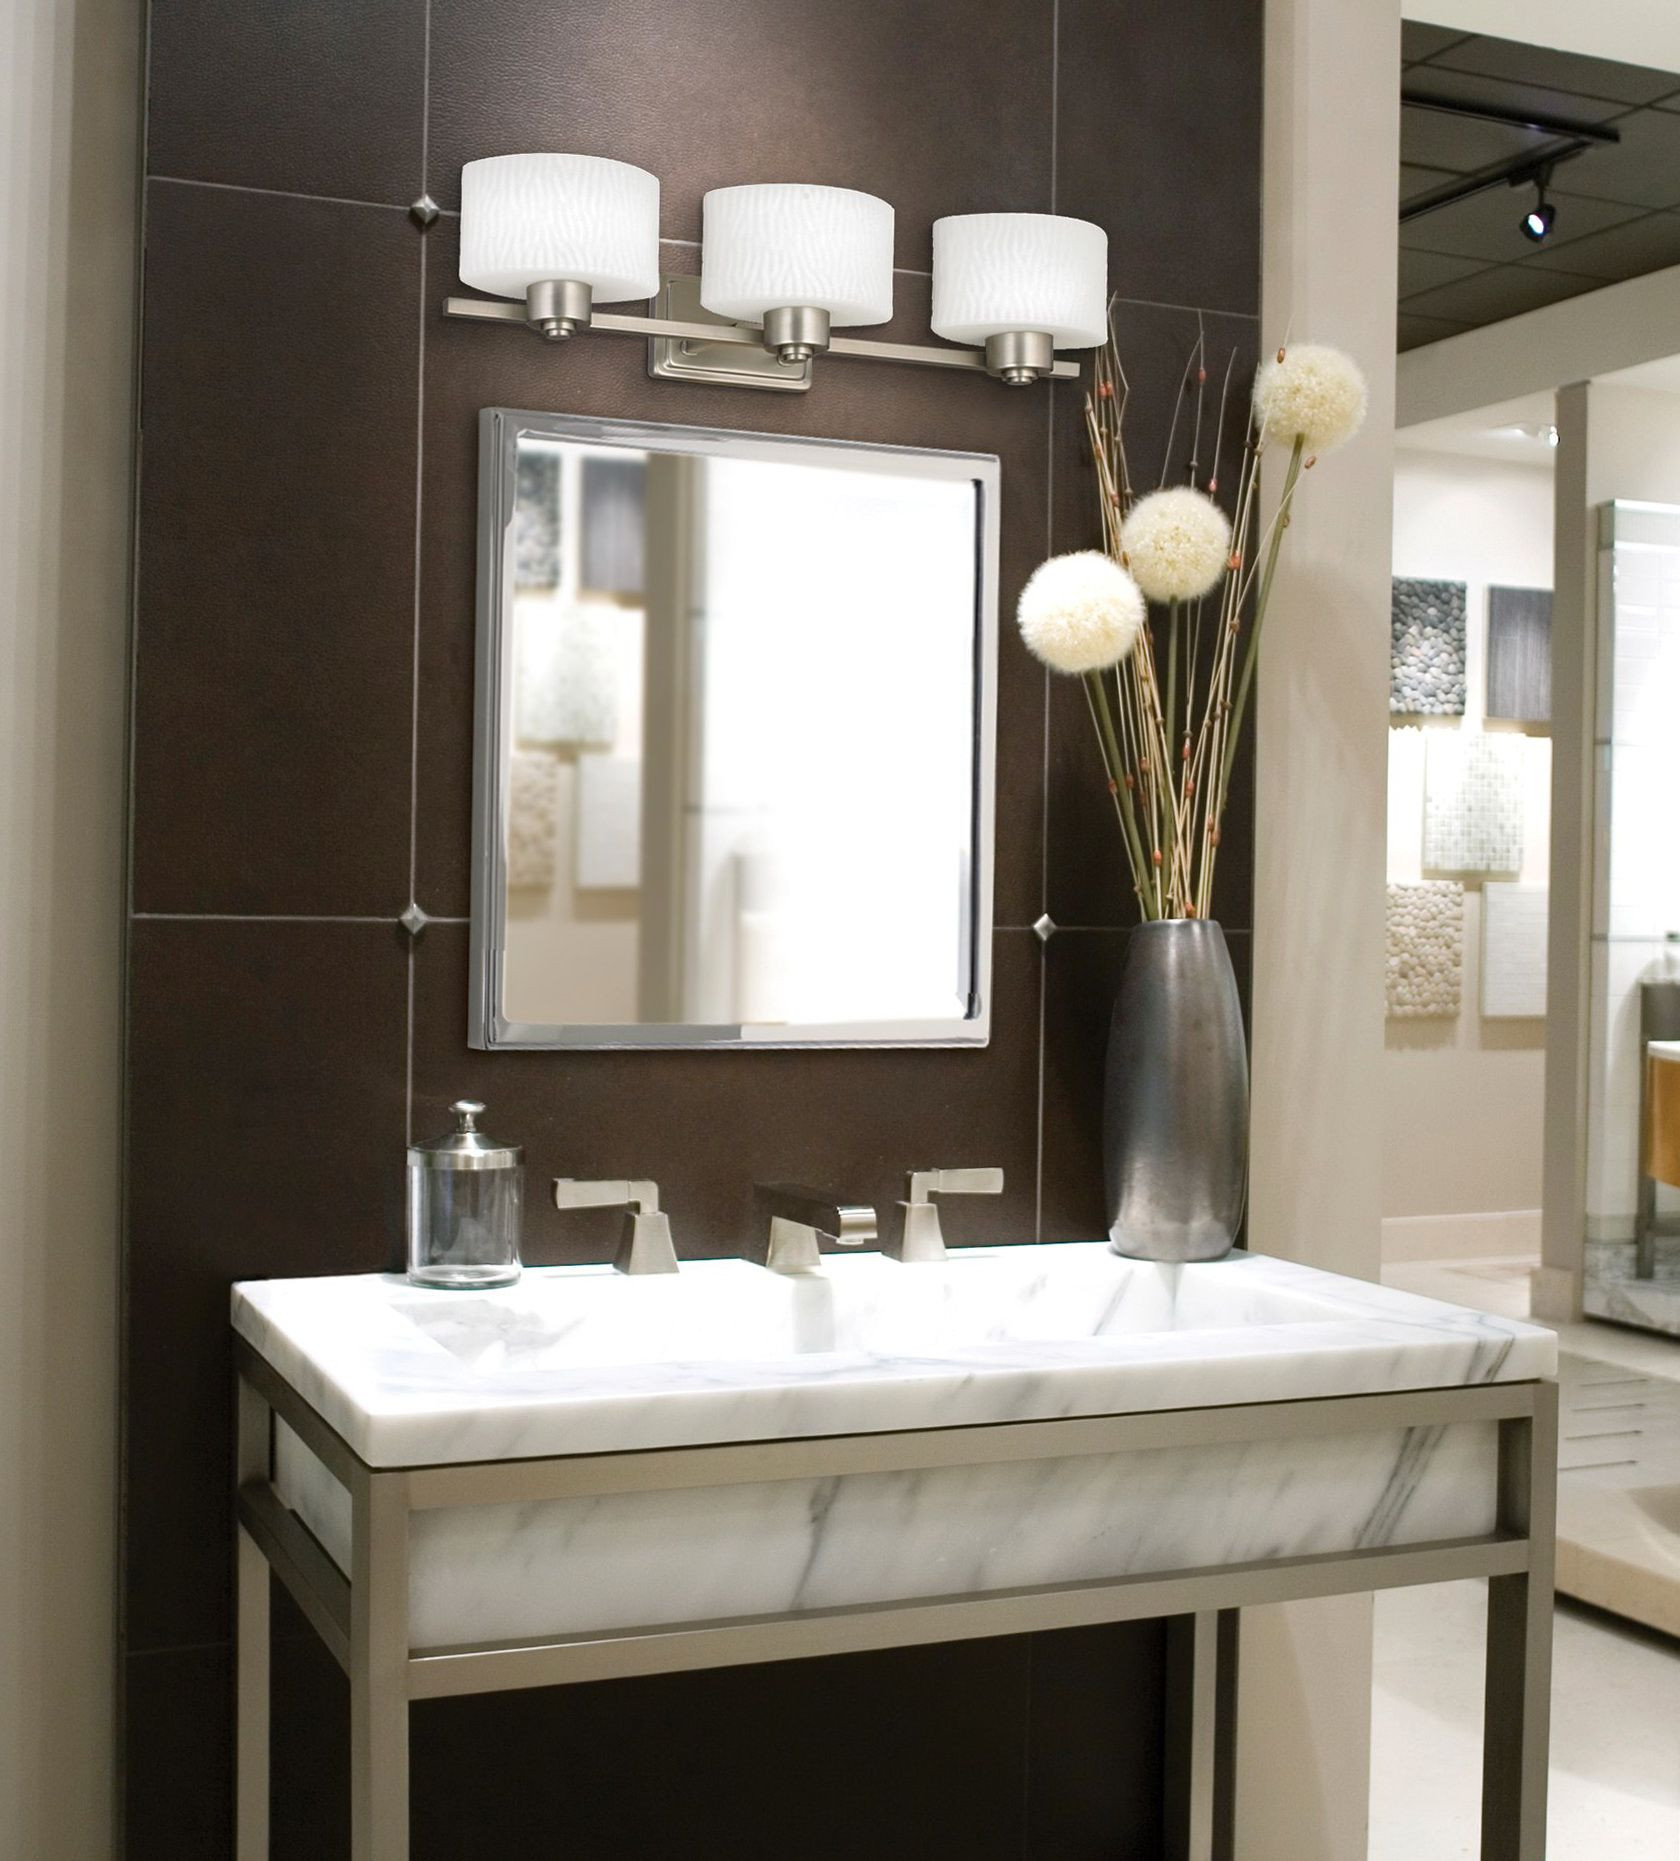 Bathroom Vanity Mirror With Lights
 Things You Haven’t Known Before About Bathroom Vanity